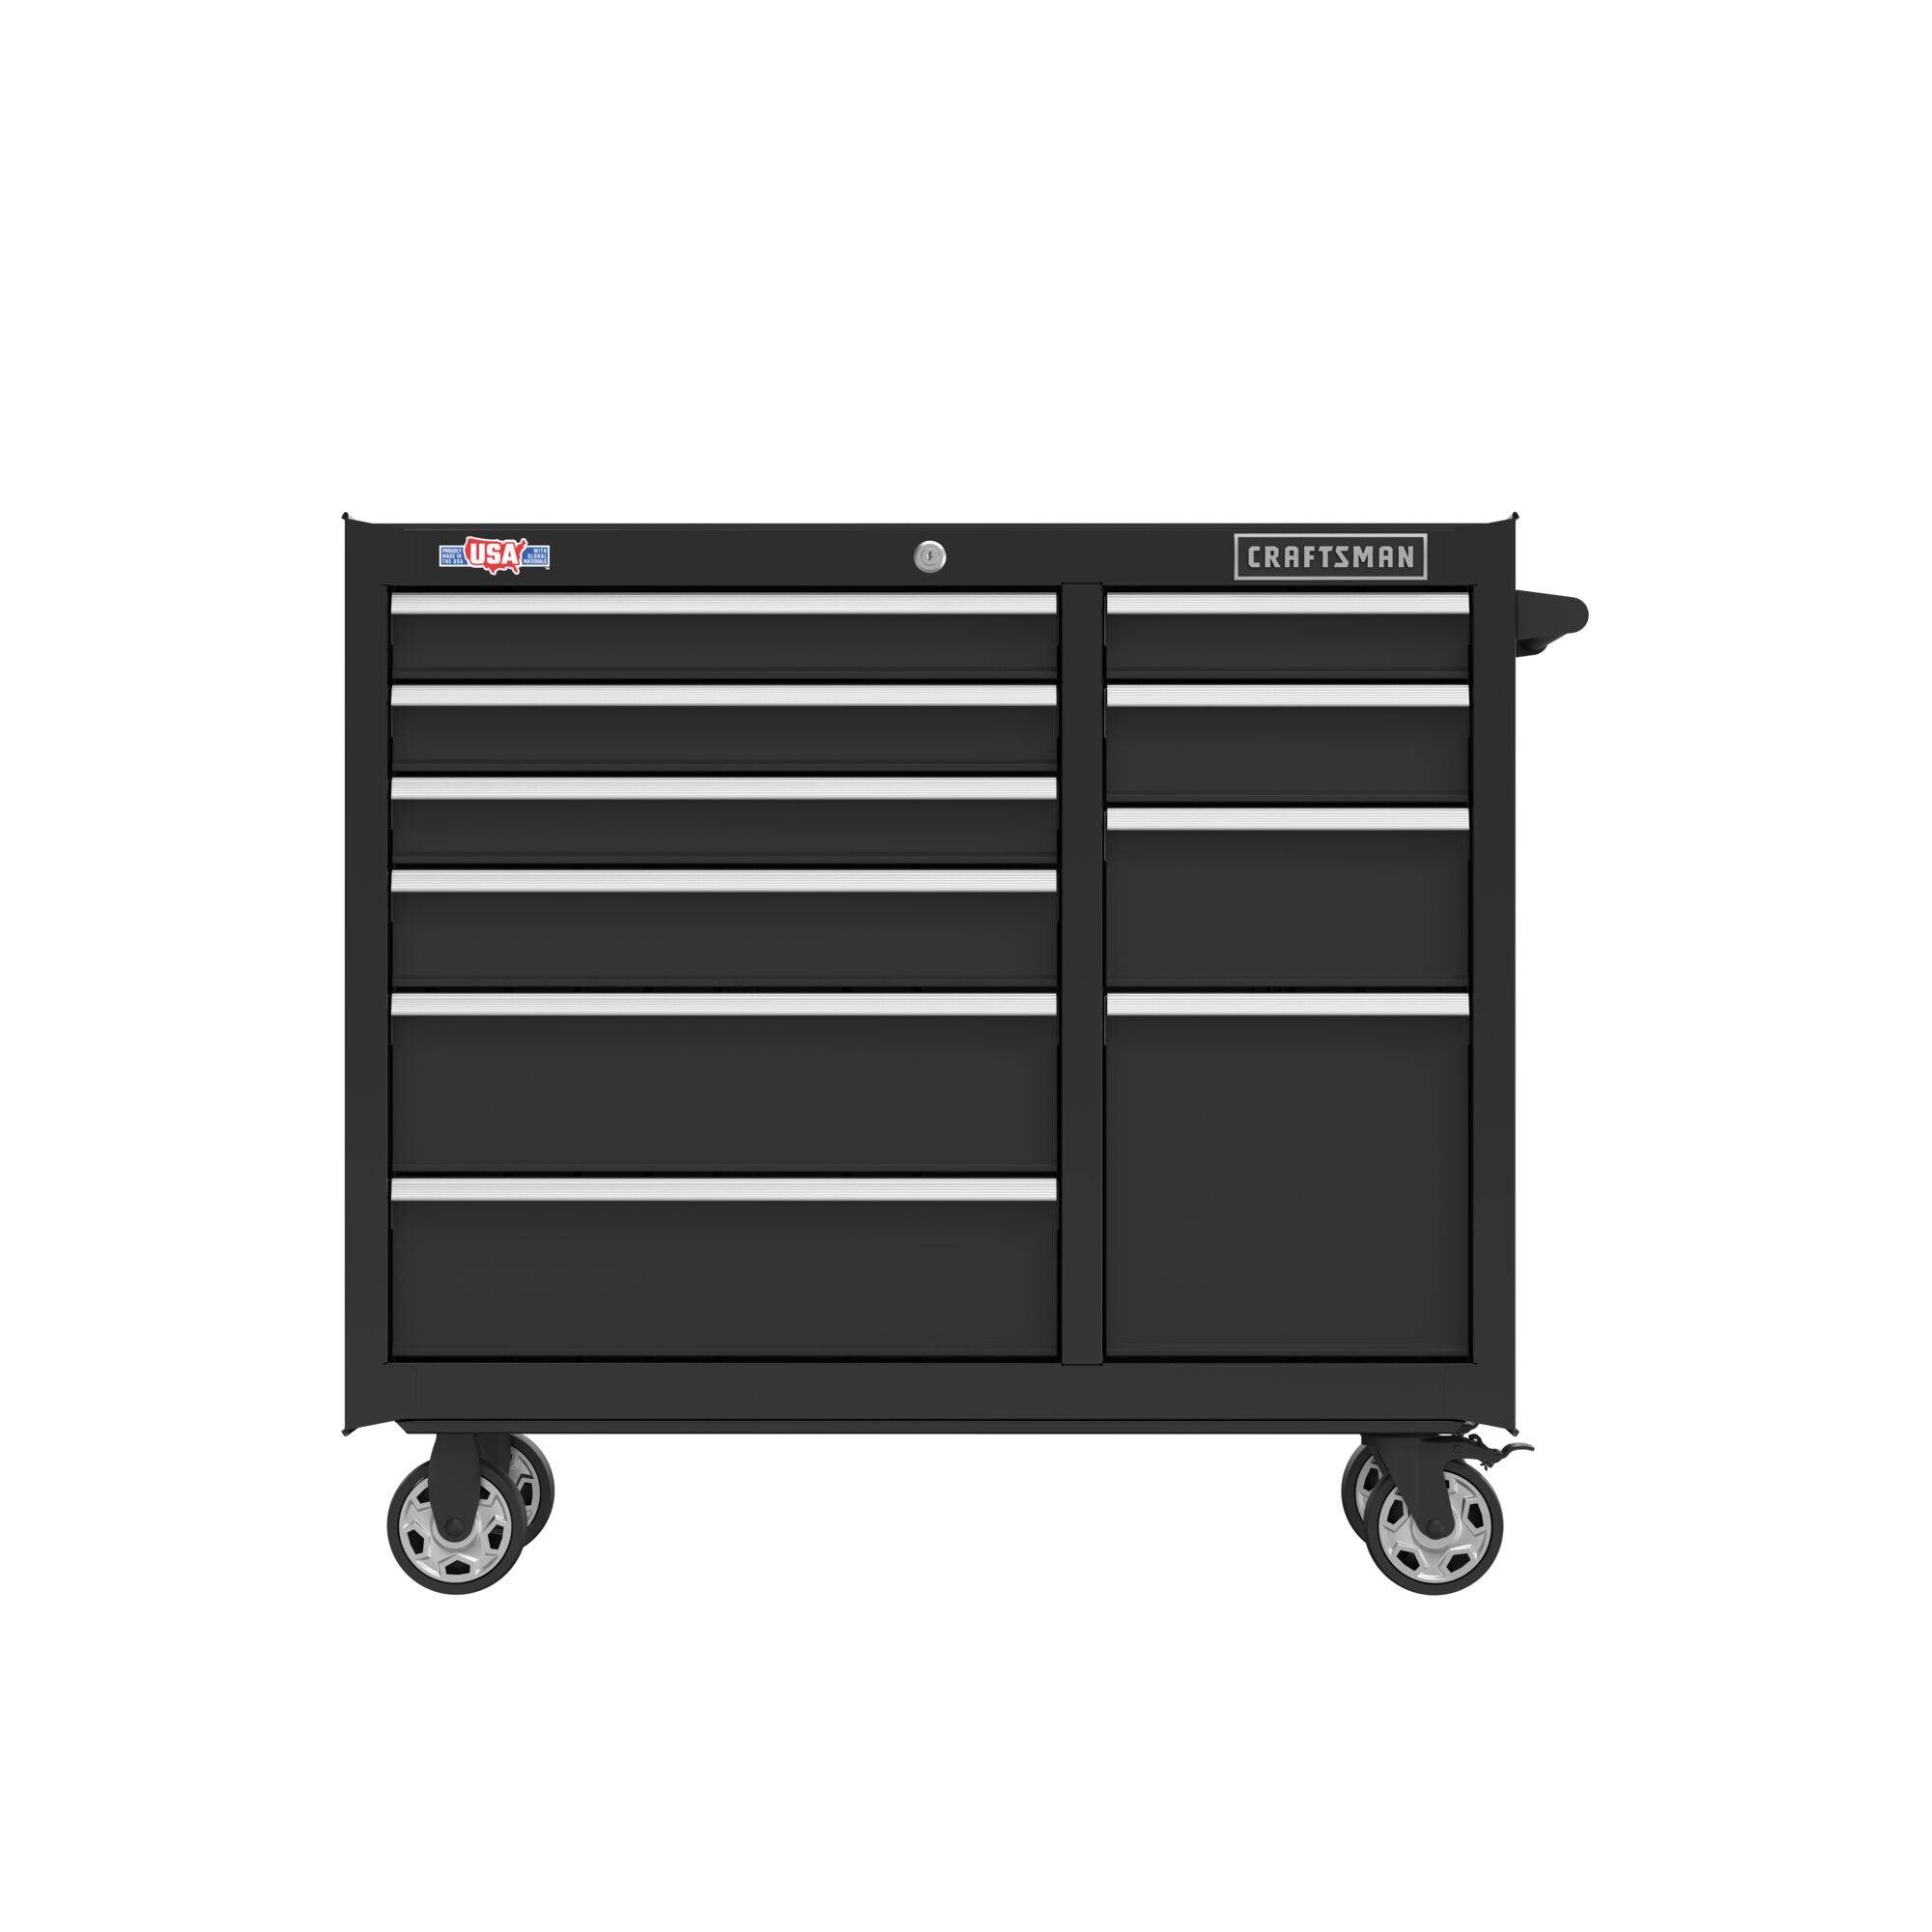 Black Steel Tool Chest with 2 Drawers and Ample Top Compartment